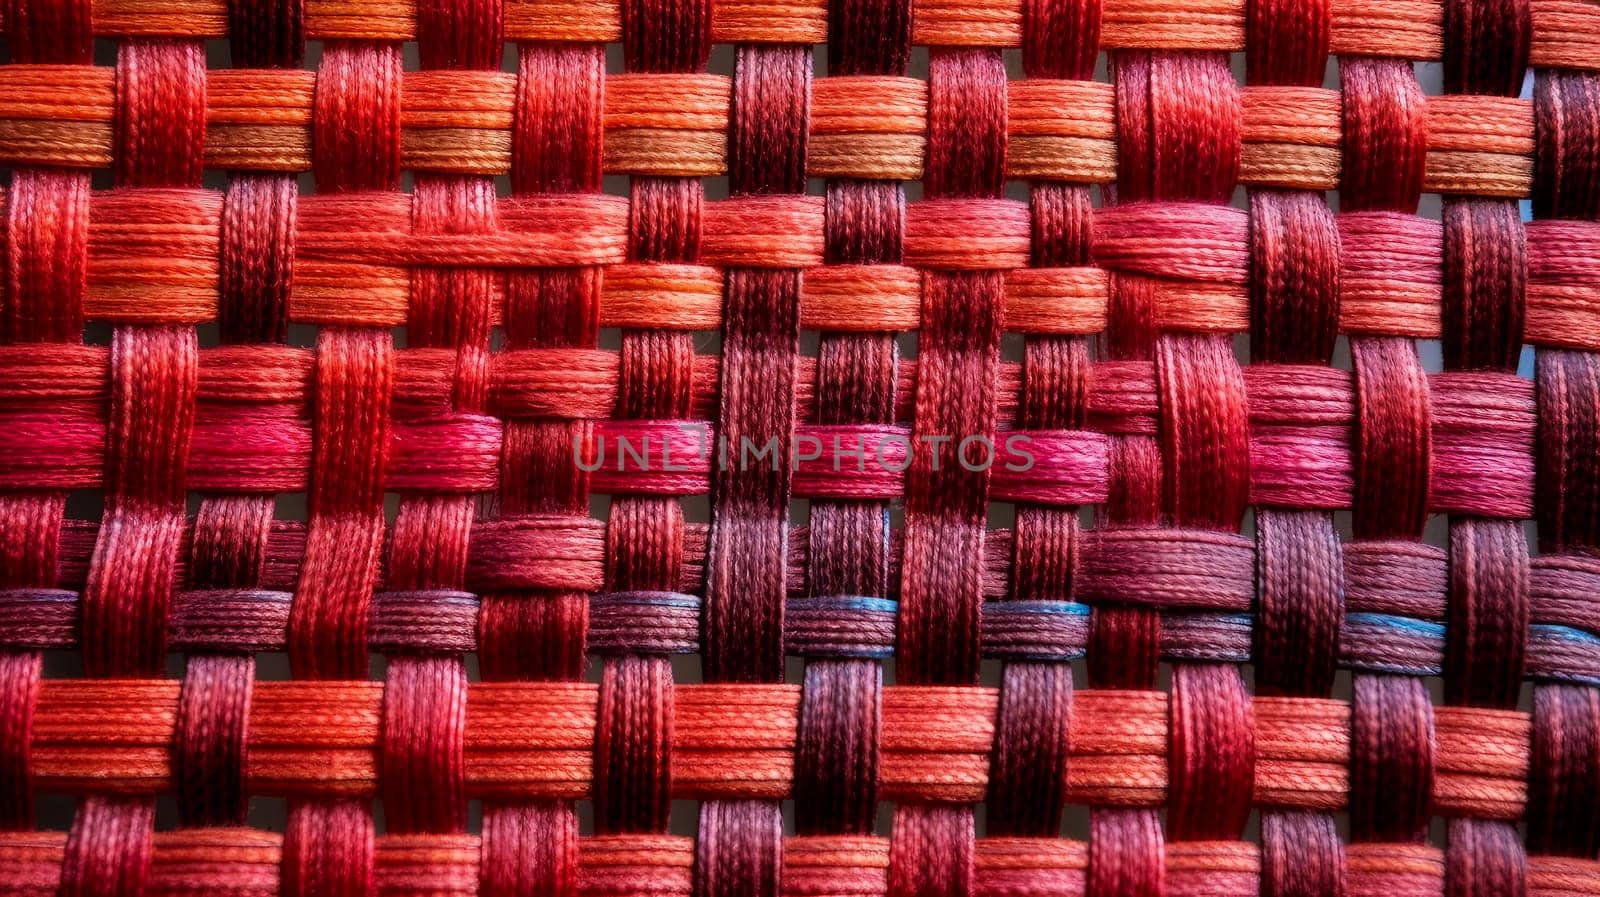 Beautiful background of red pink fabric close-up background texture linen twine braid cotton linen woven canvas jute burlap natural fiber bag linen fabric clothing, copy space by Alla_Yurtayeva